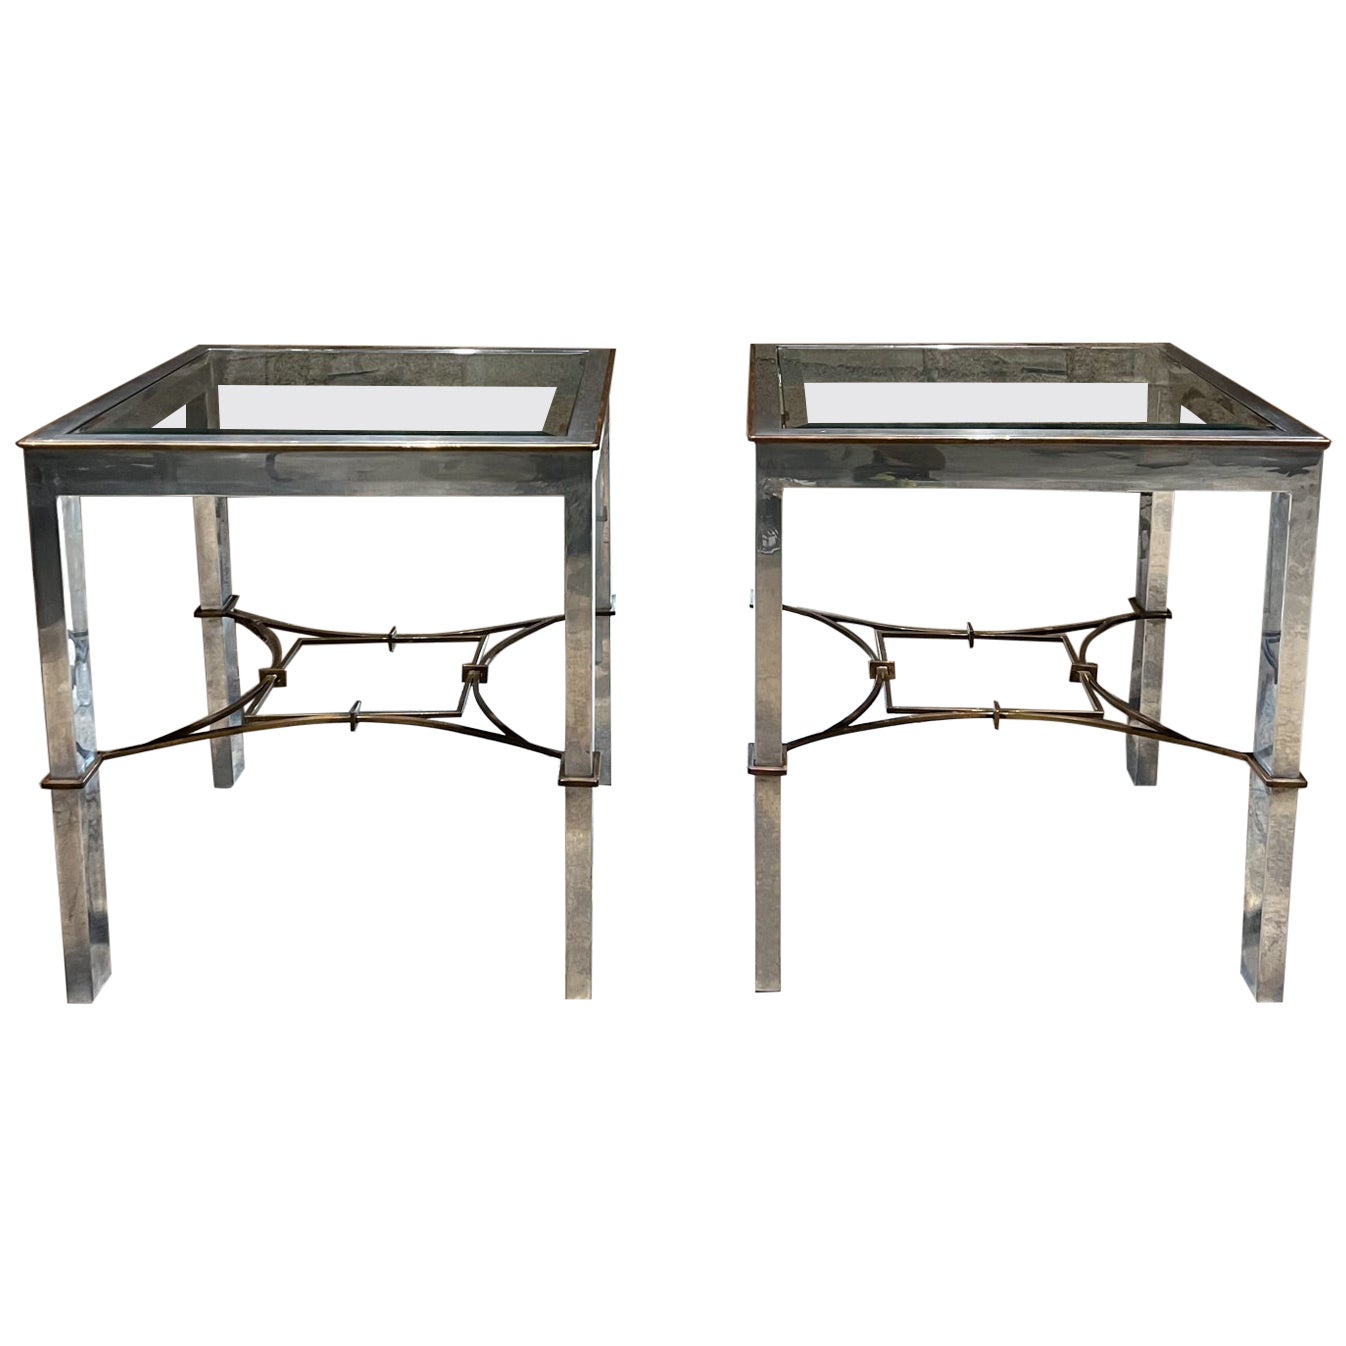 1960s Arturo Pani Modern Side Tables Aluminum and Bronze Mexico City